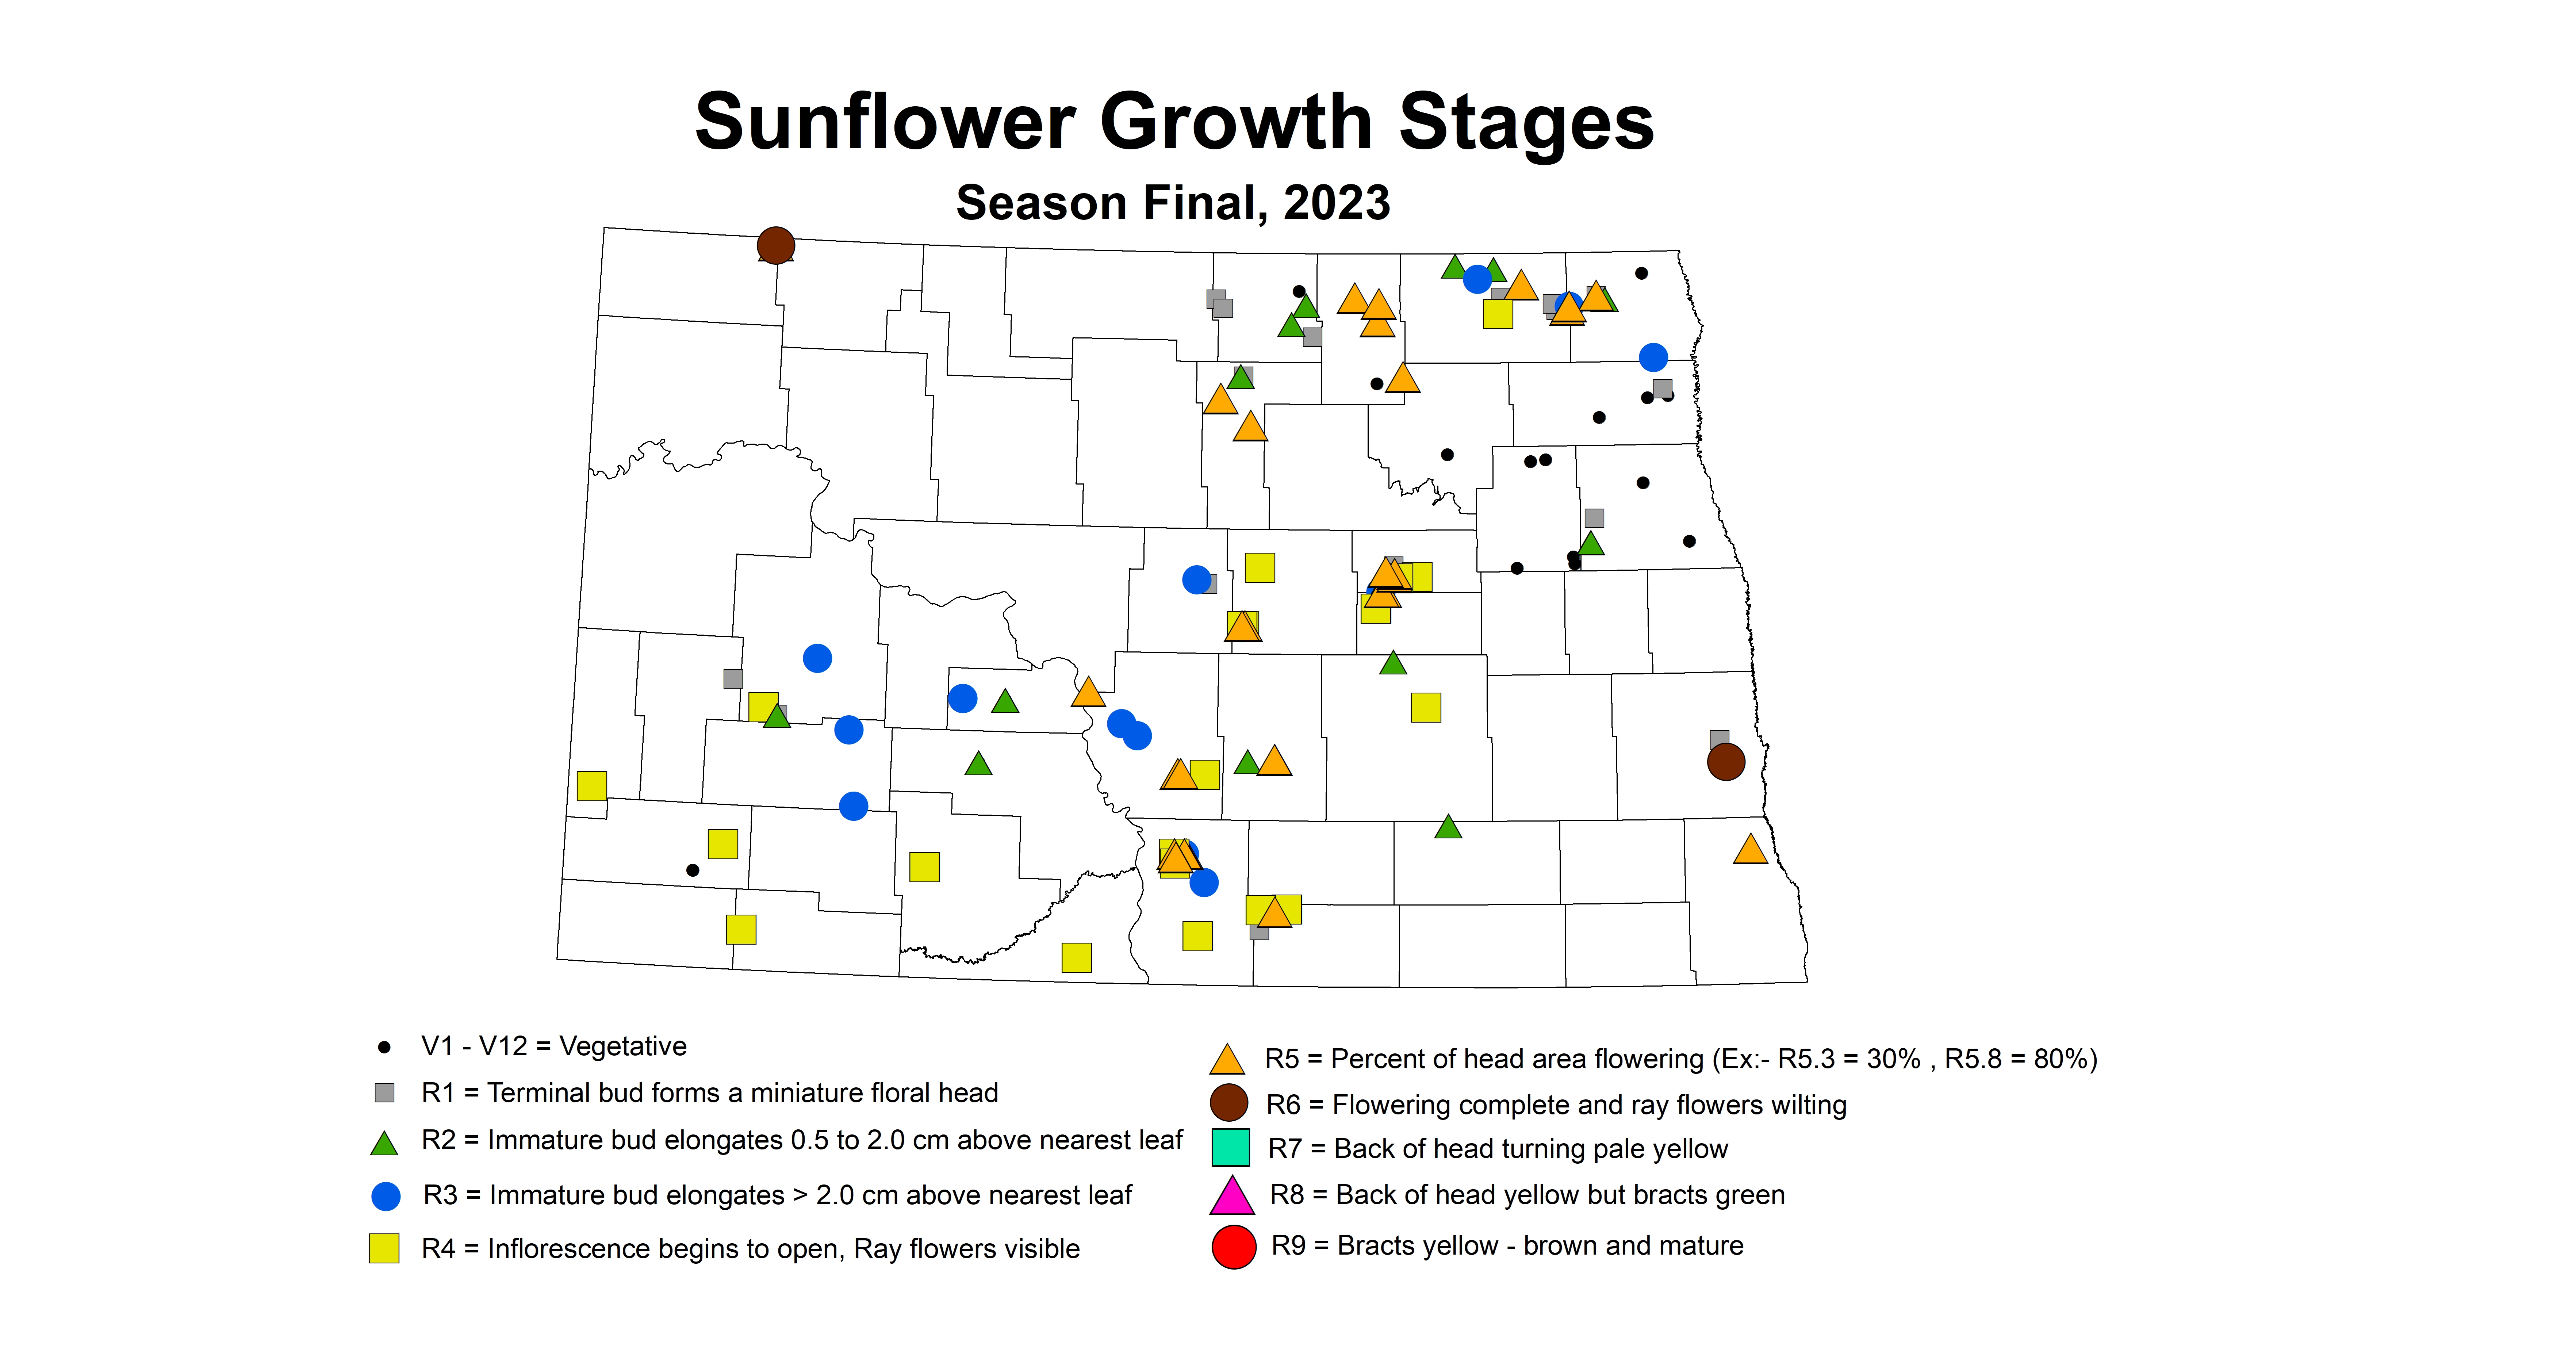 sunflower growth stages season final 2023